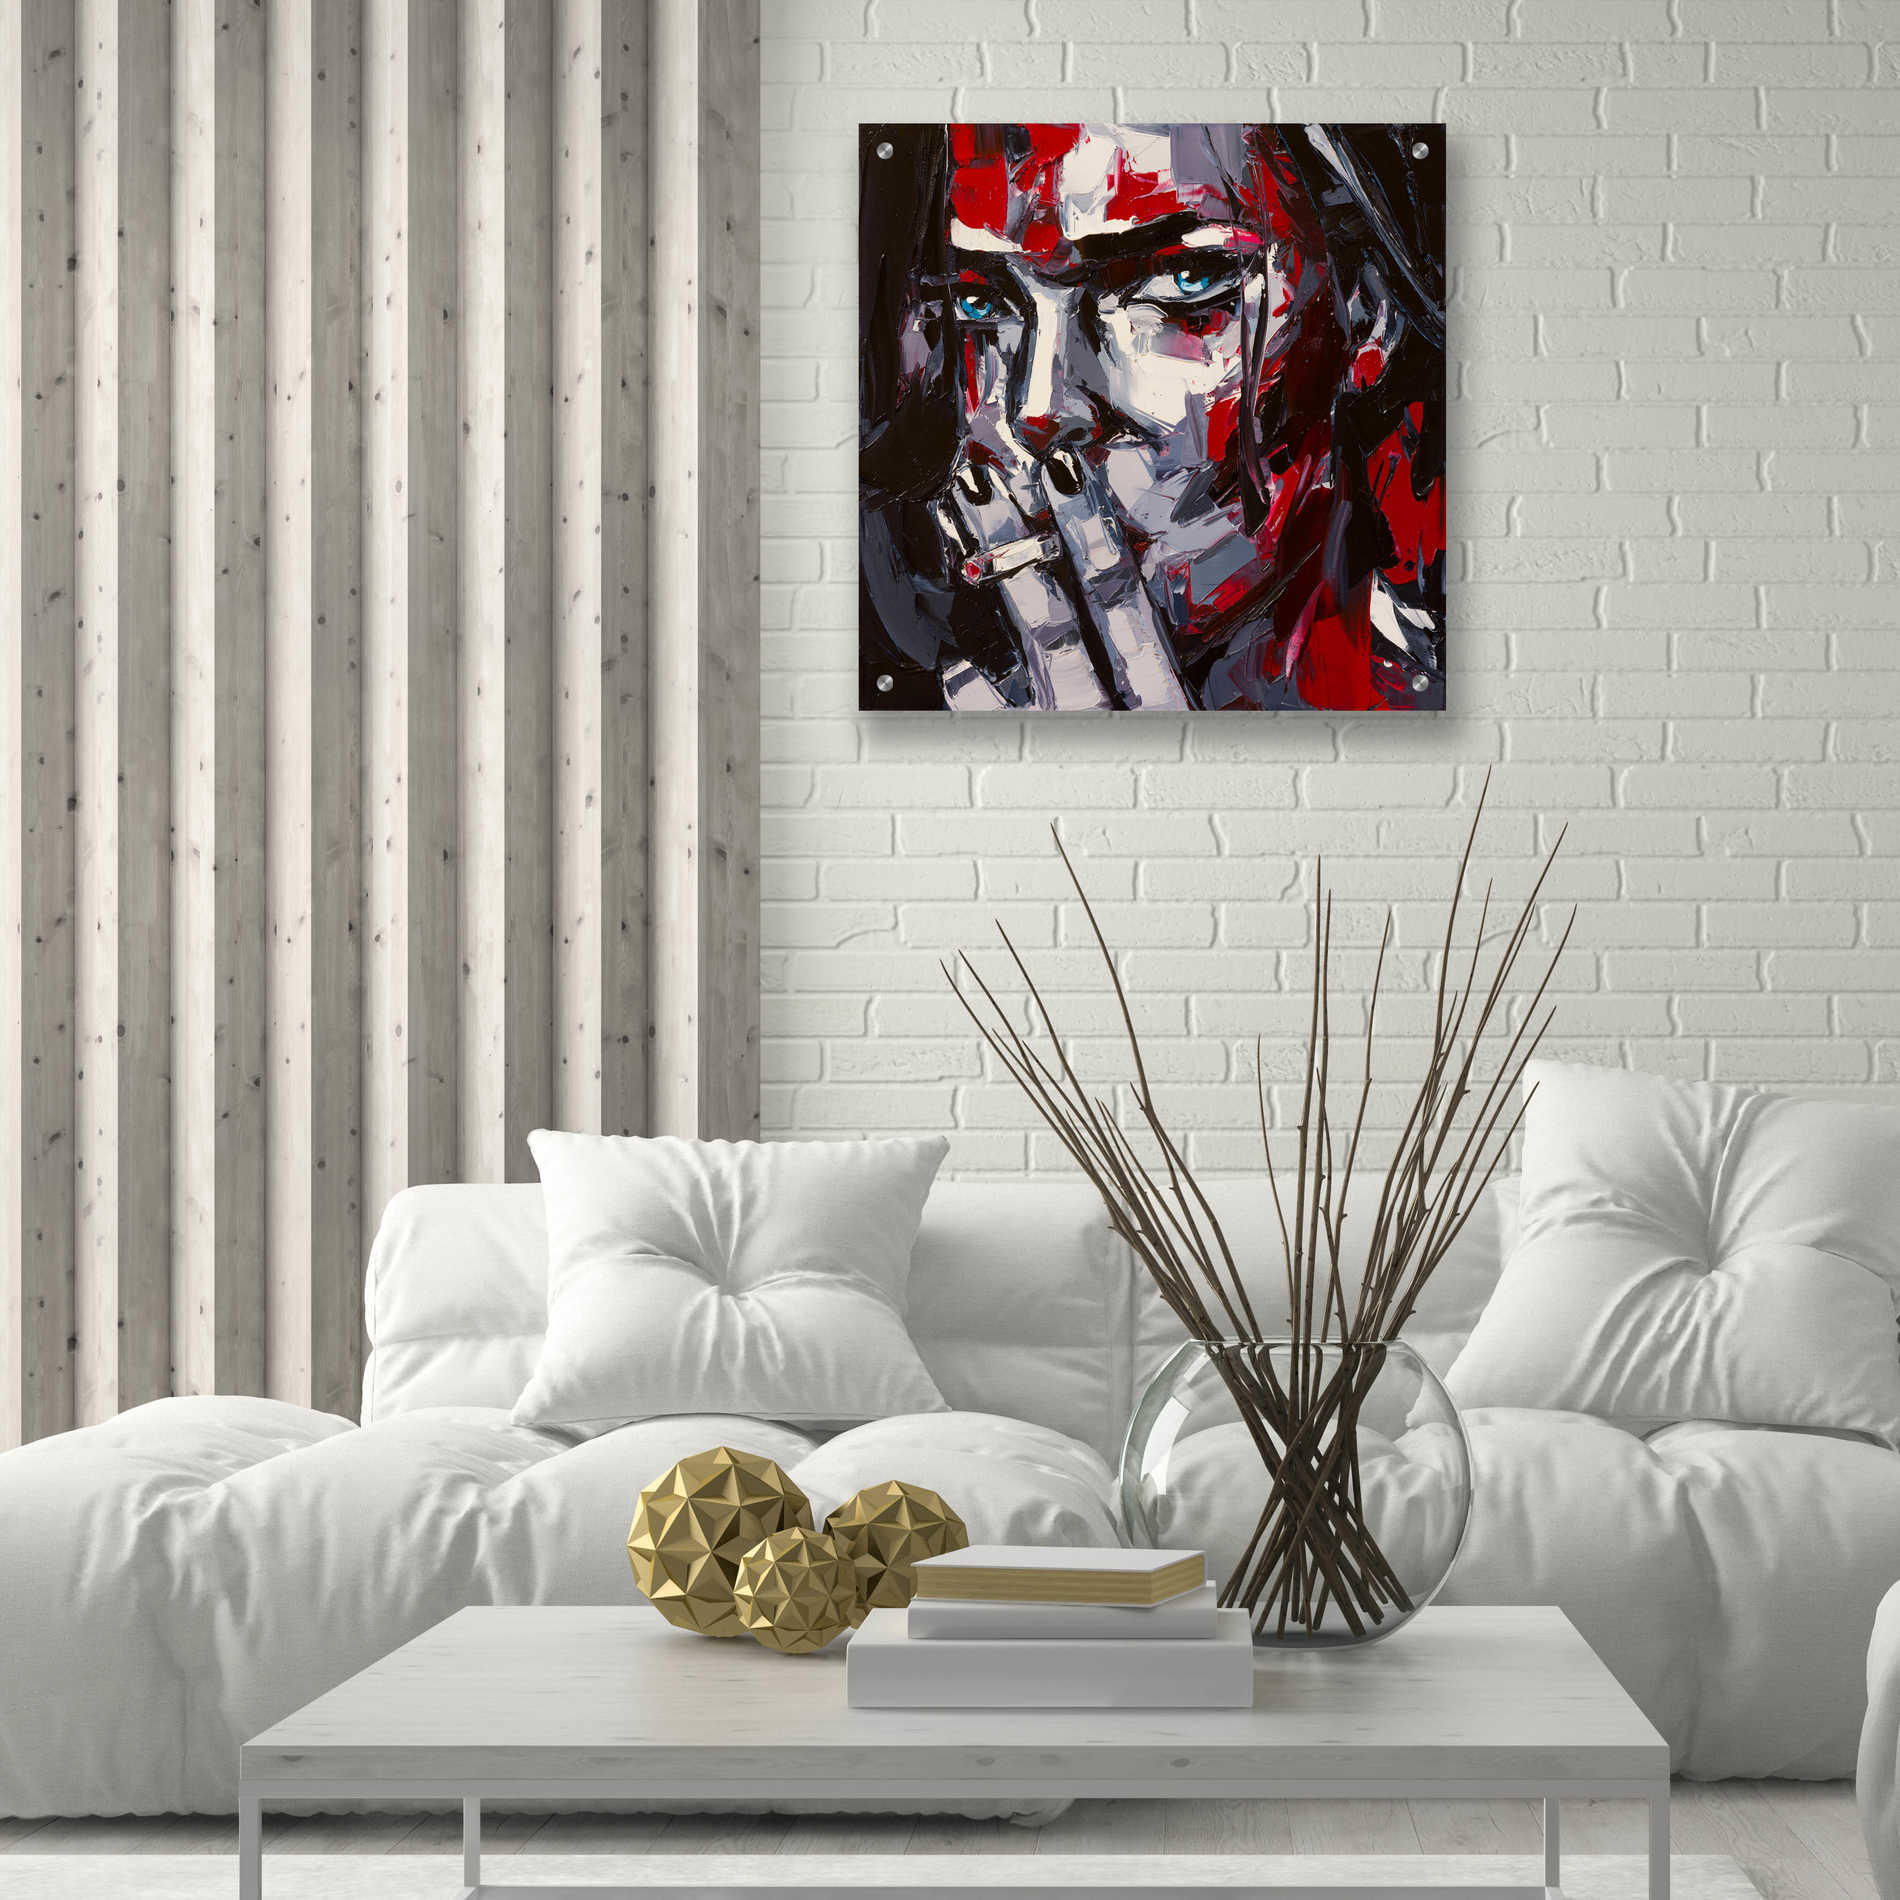 Epic Art 'Contour Of The Sin,' Acrylic Glass Wall Art,24x24